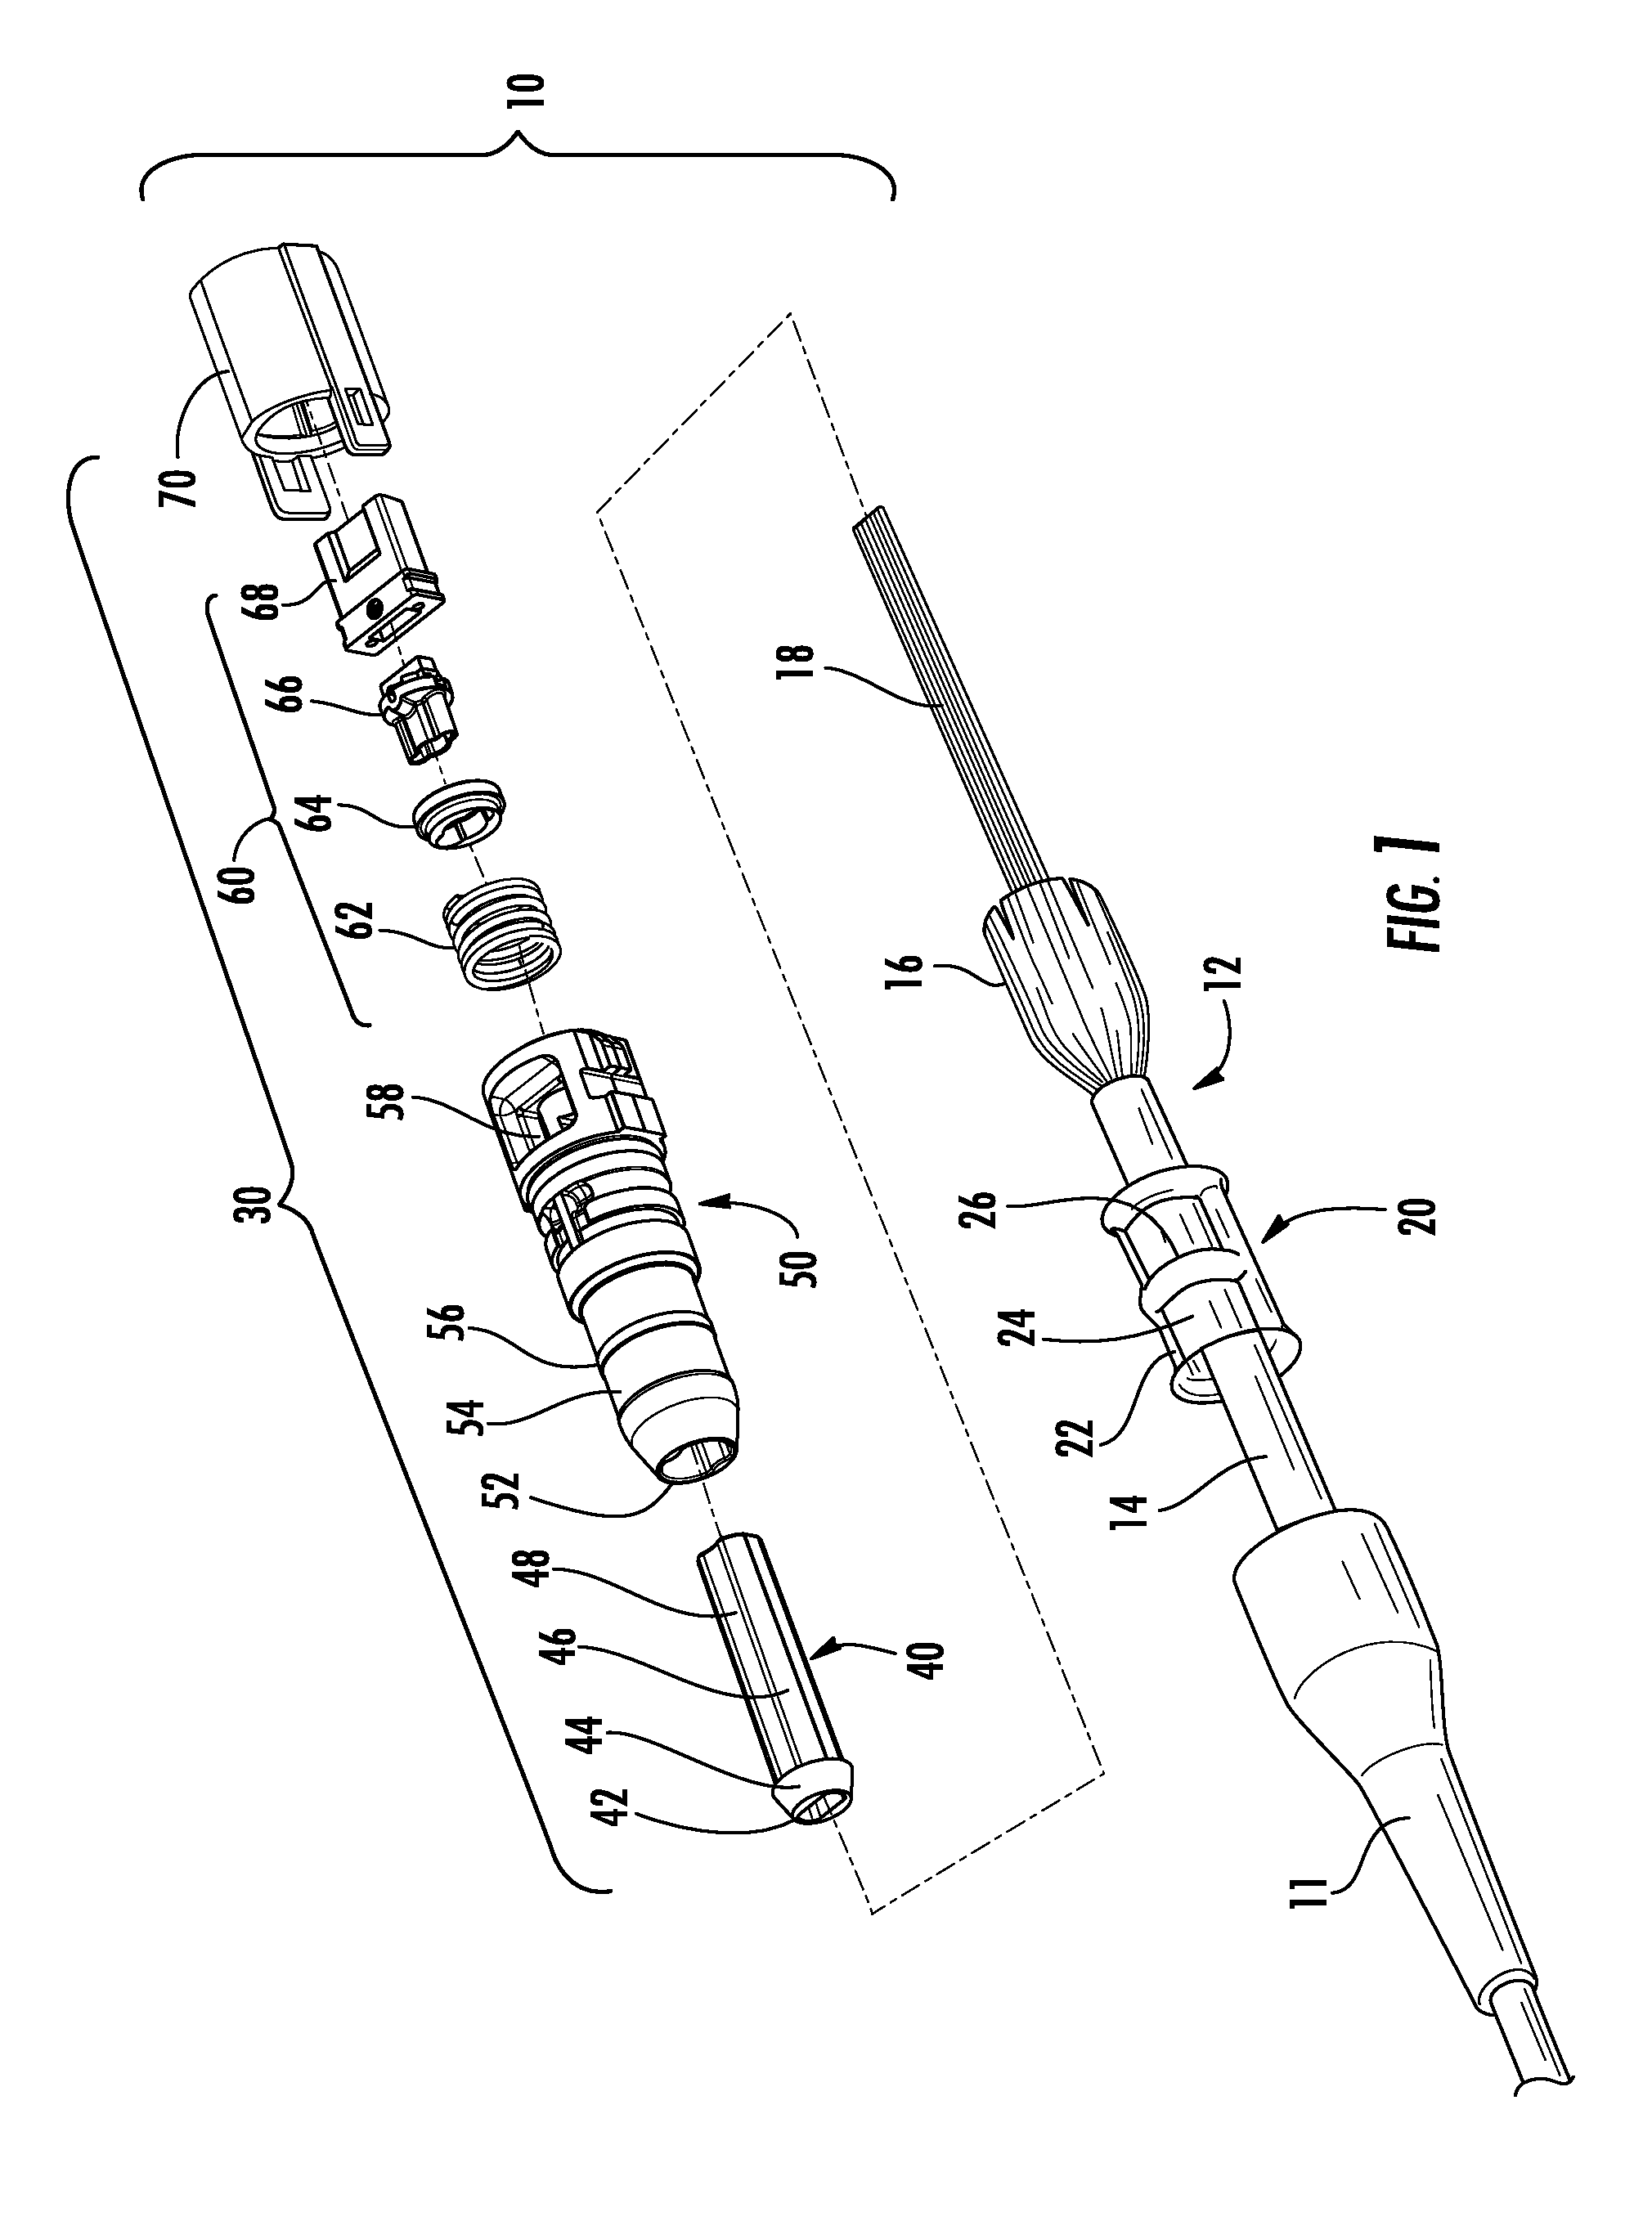 Fiber optic cable assemblies with mechanically interlocking crimp bands and methods of making the assemblies